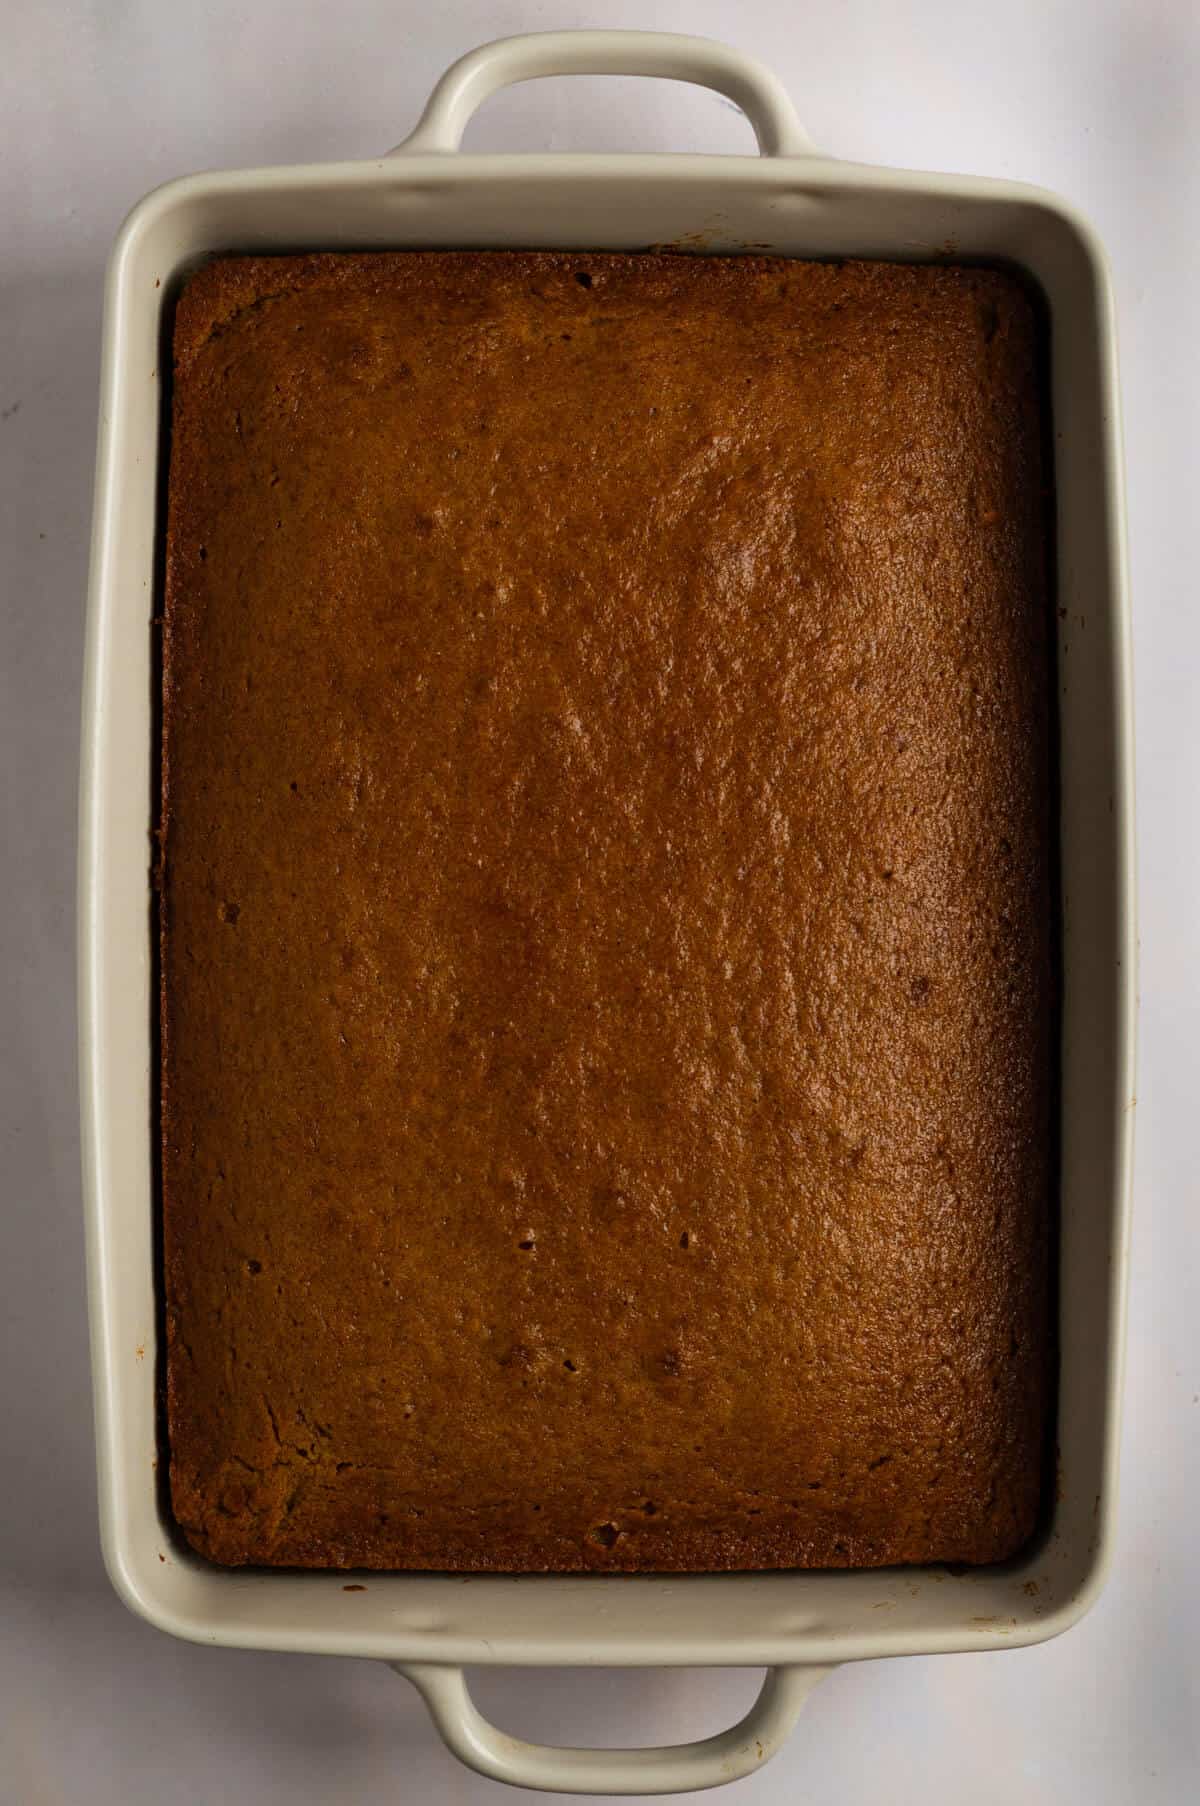 Applesauce spice cake that has been baked and removed from the oven.